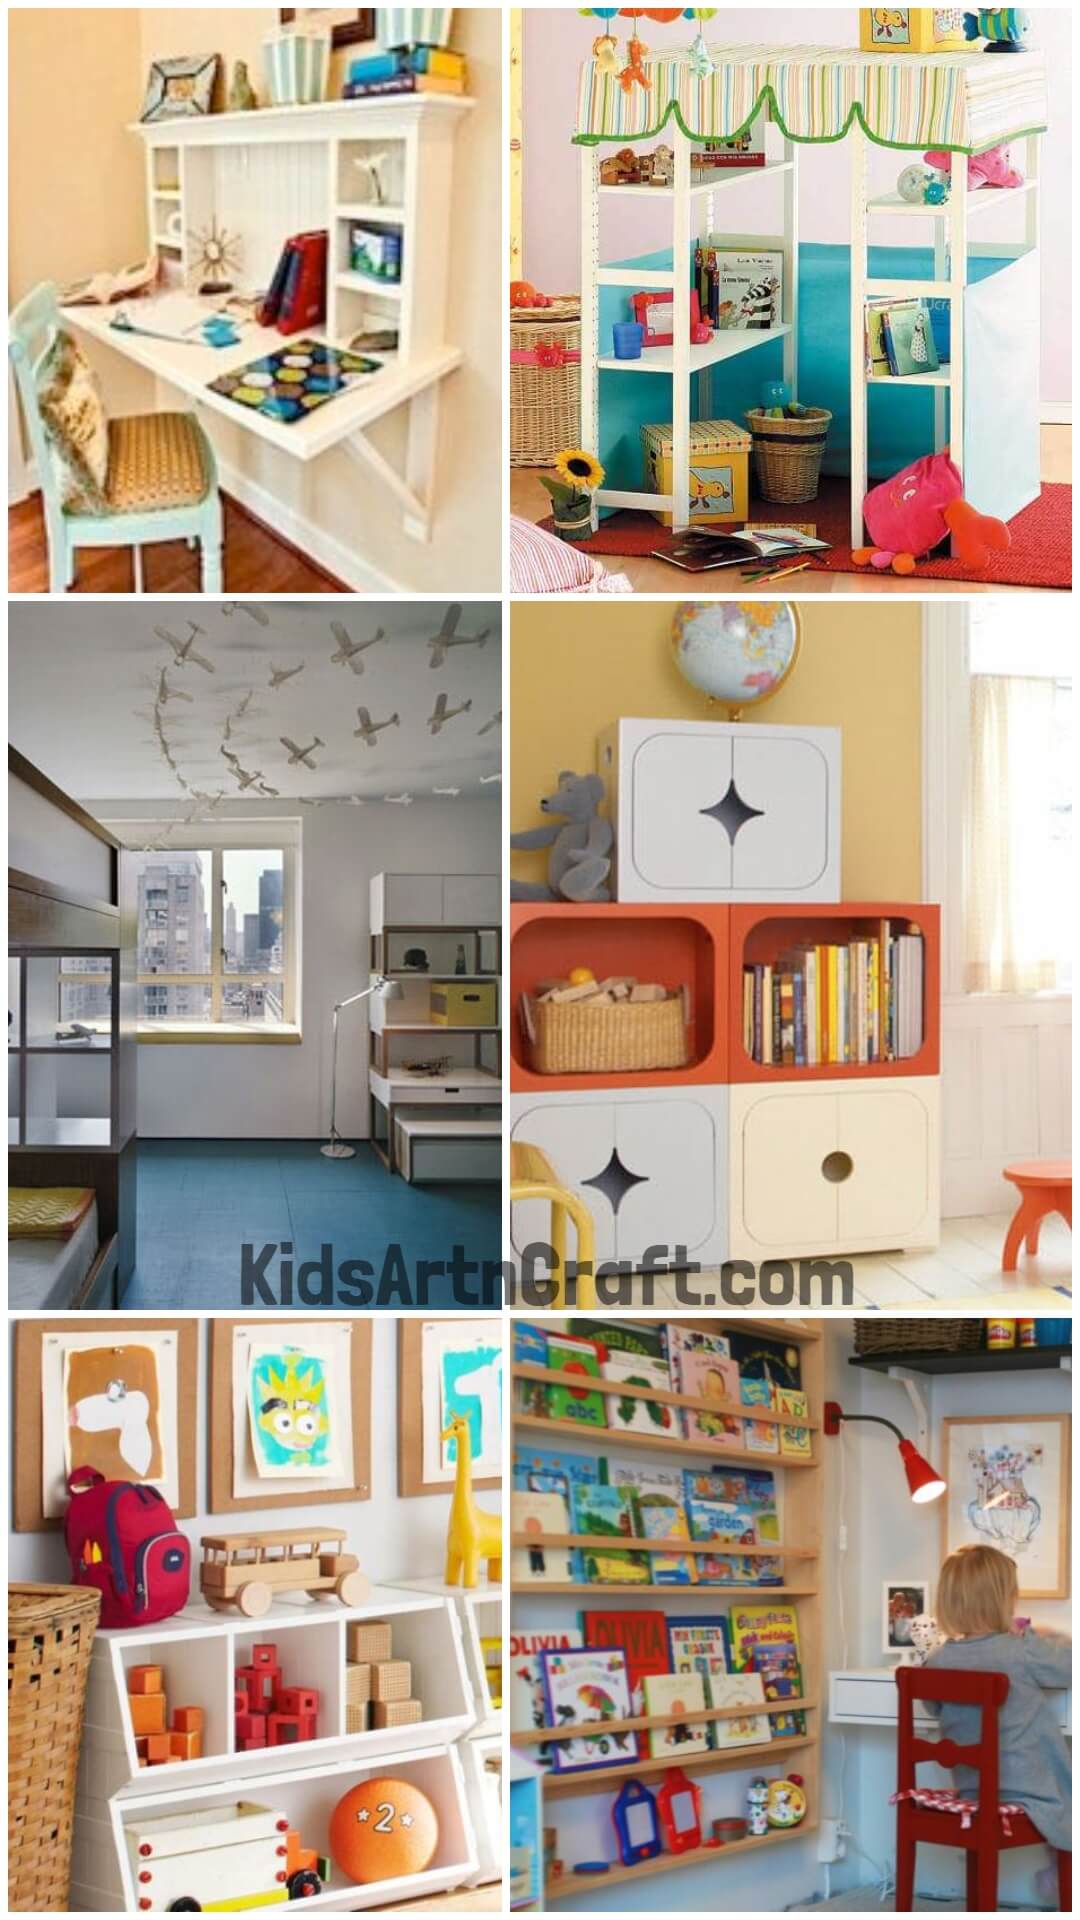 Awesome Storage Ideas For Kid's Room